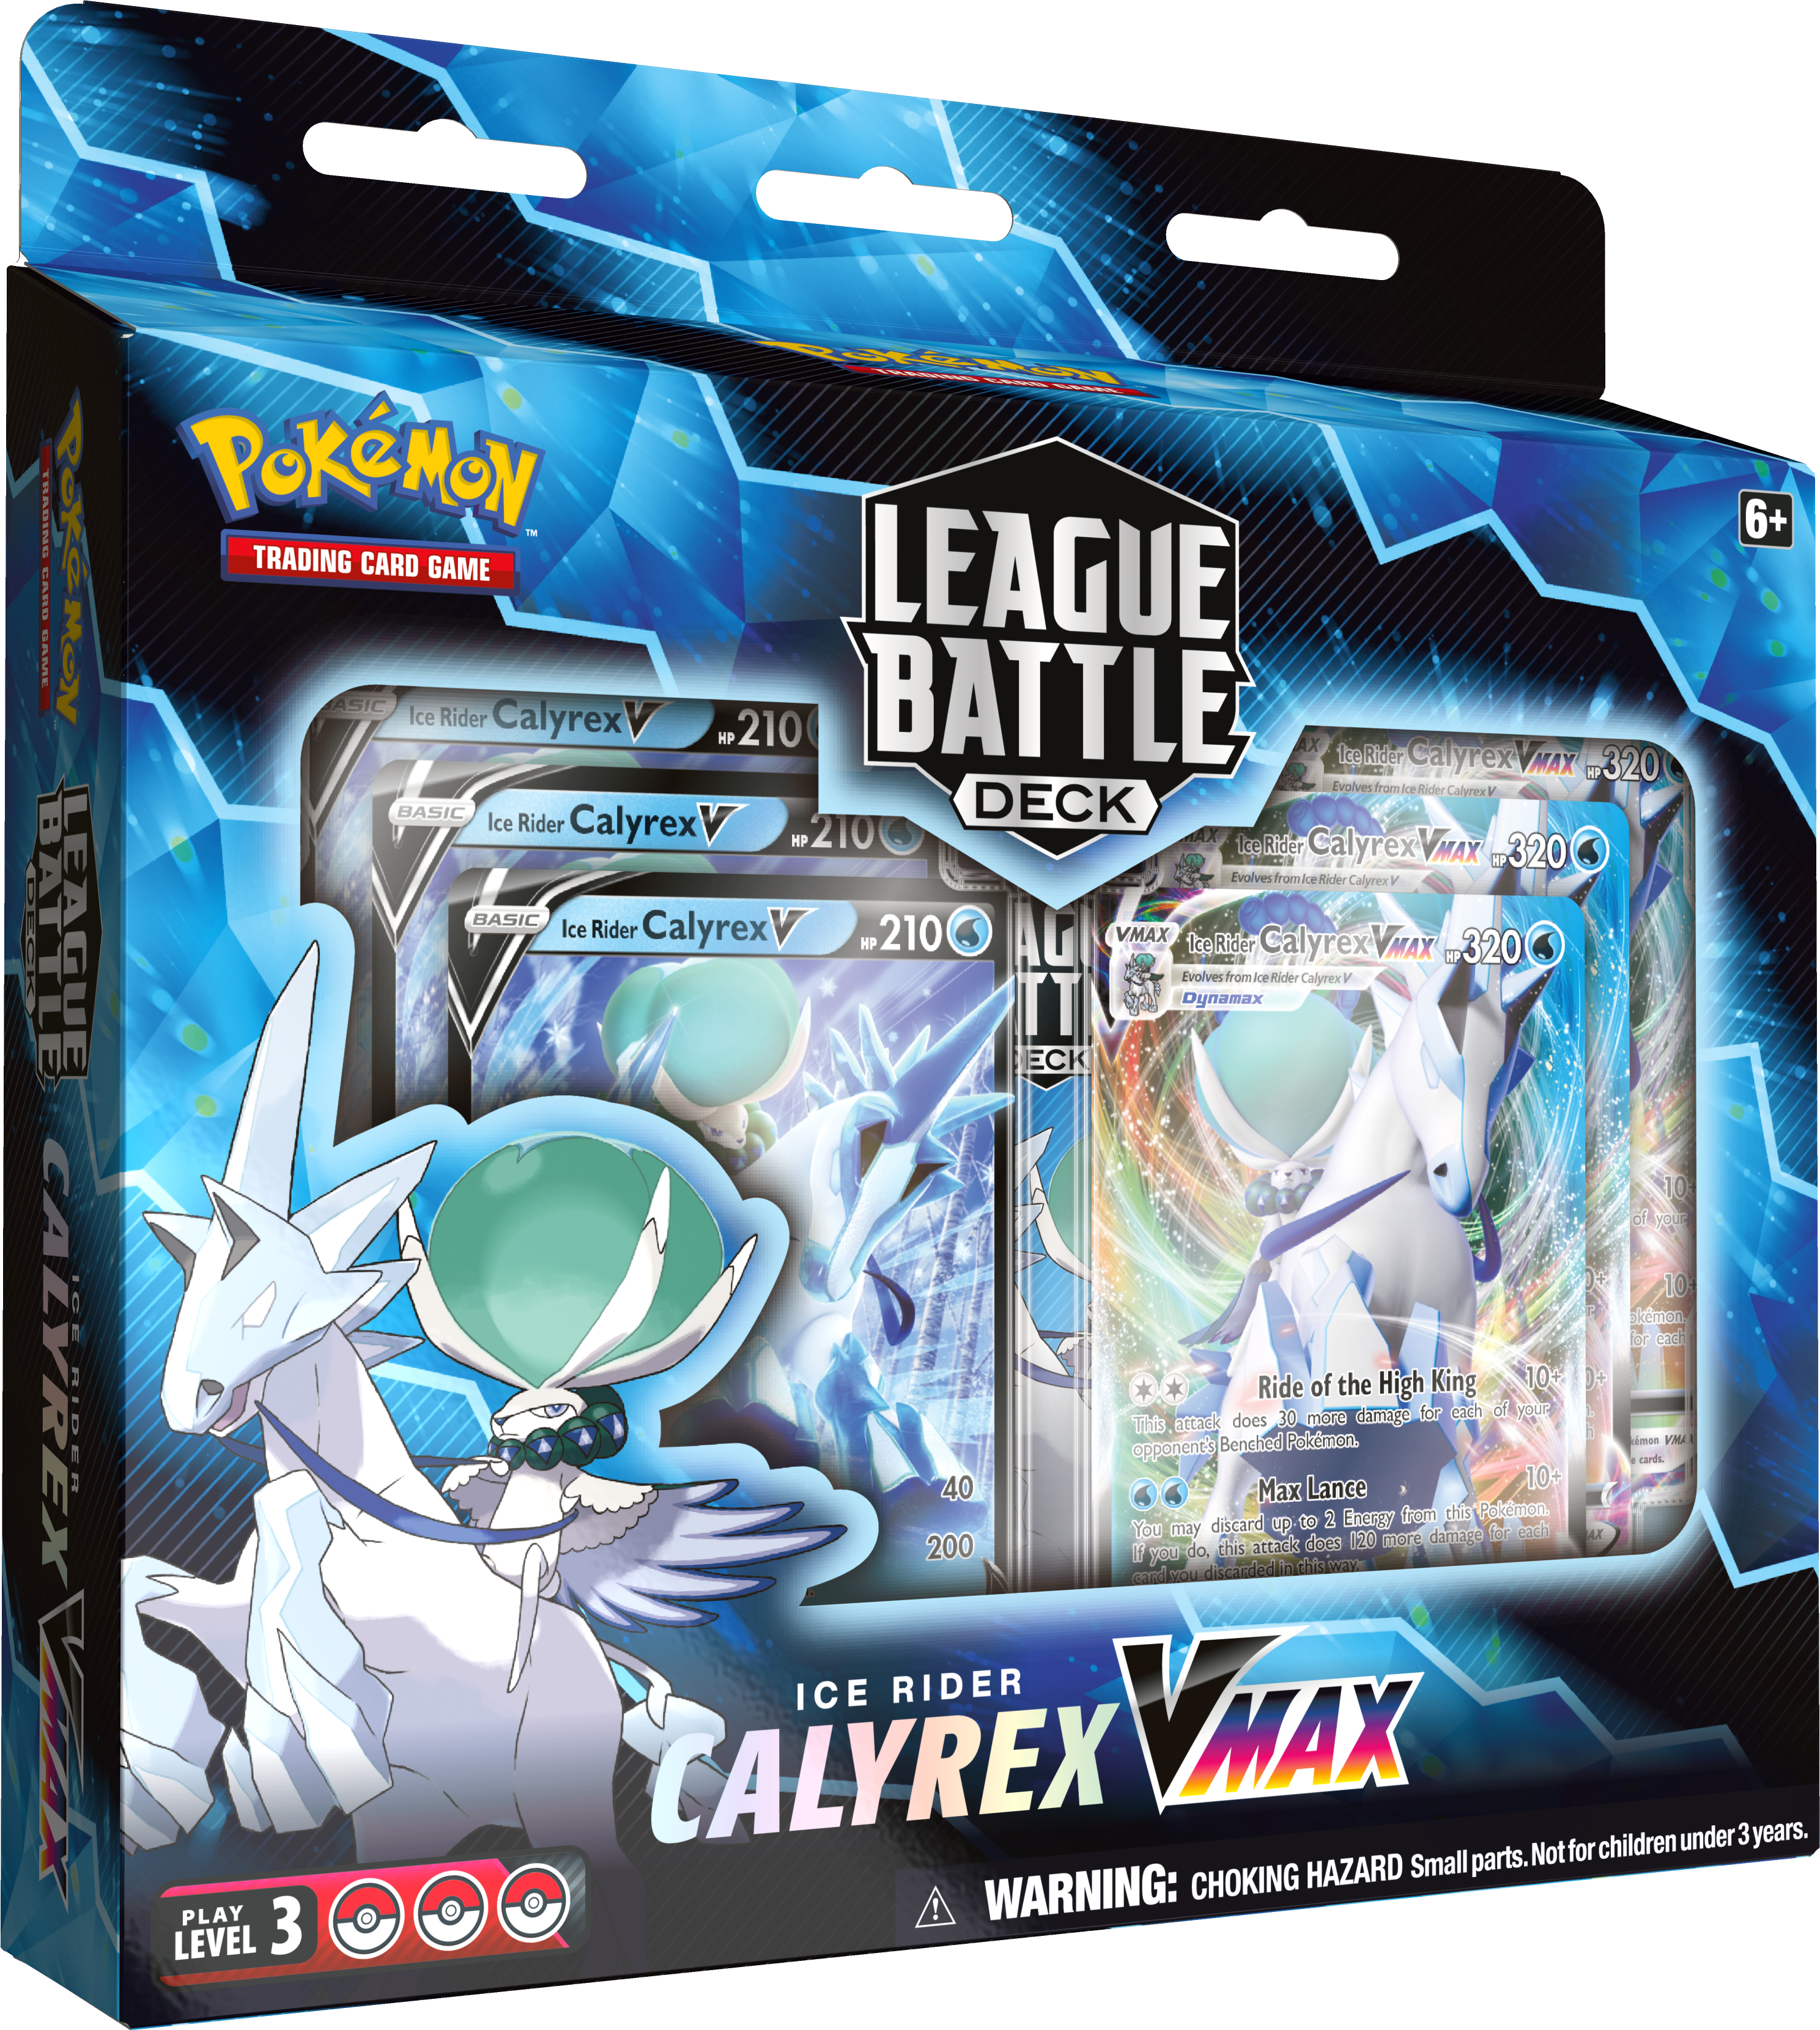 League Battle Deck - Ice Rider Calyrex (Ships by July 22nd)